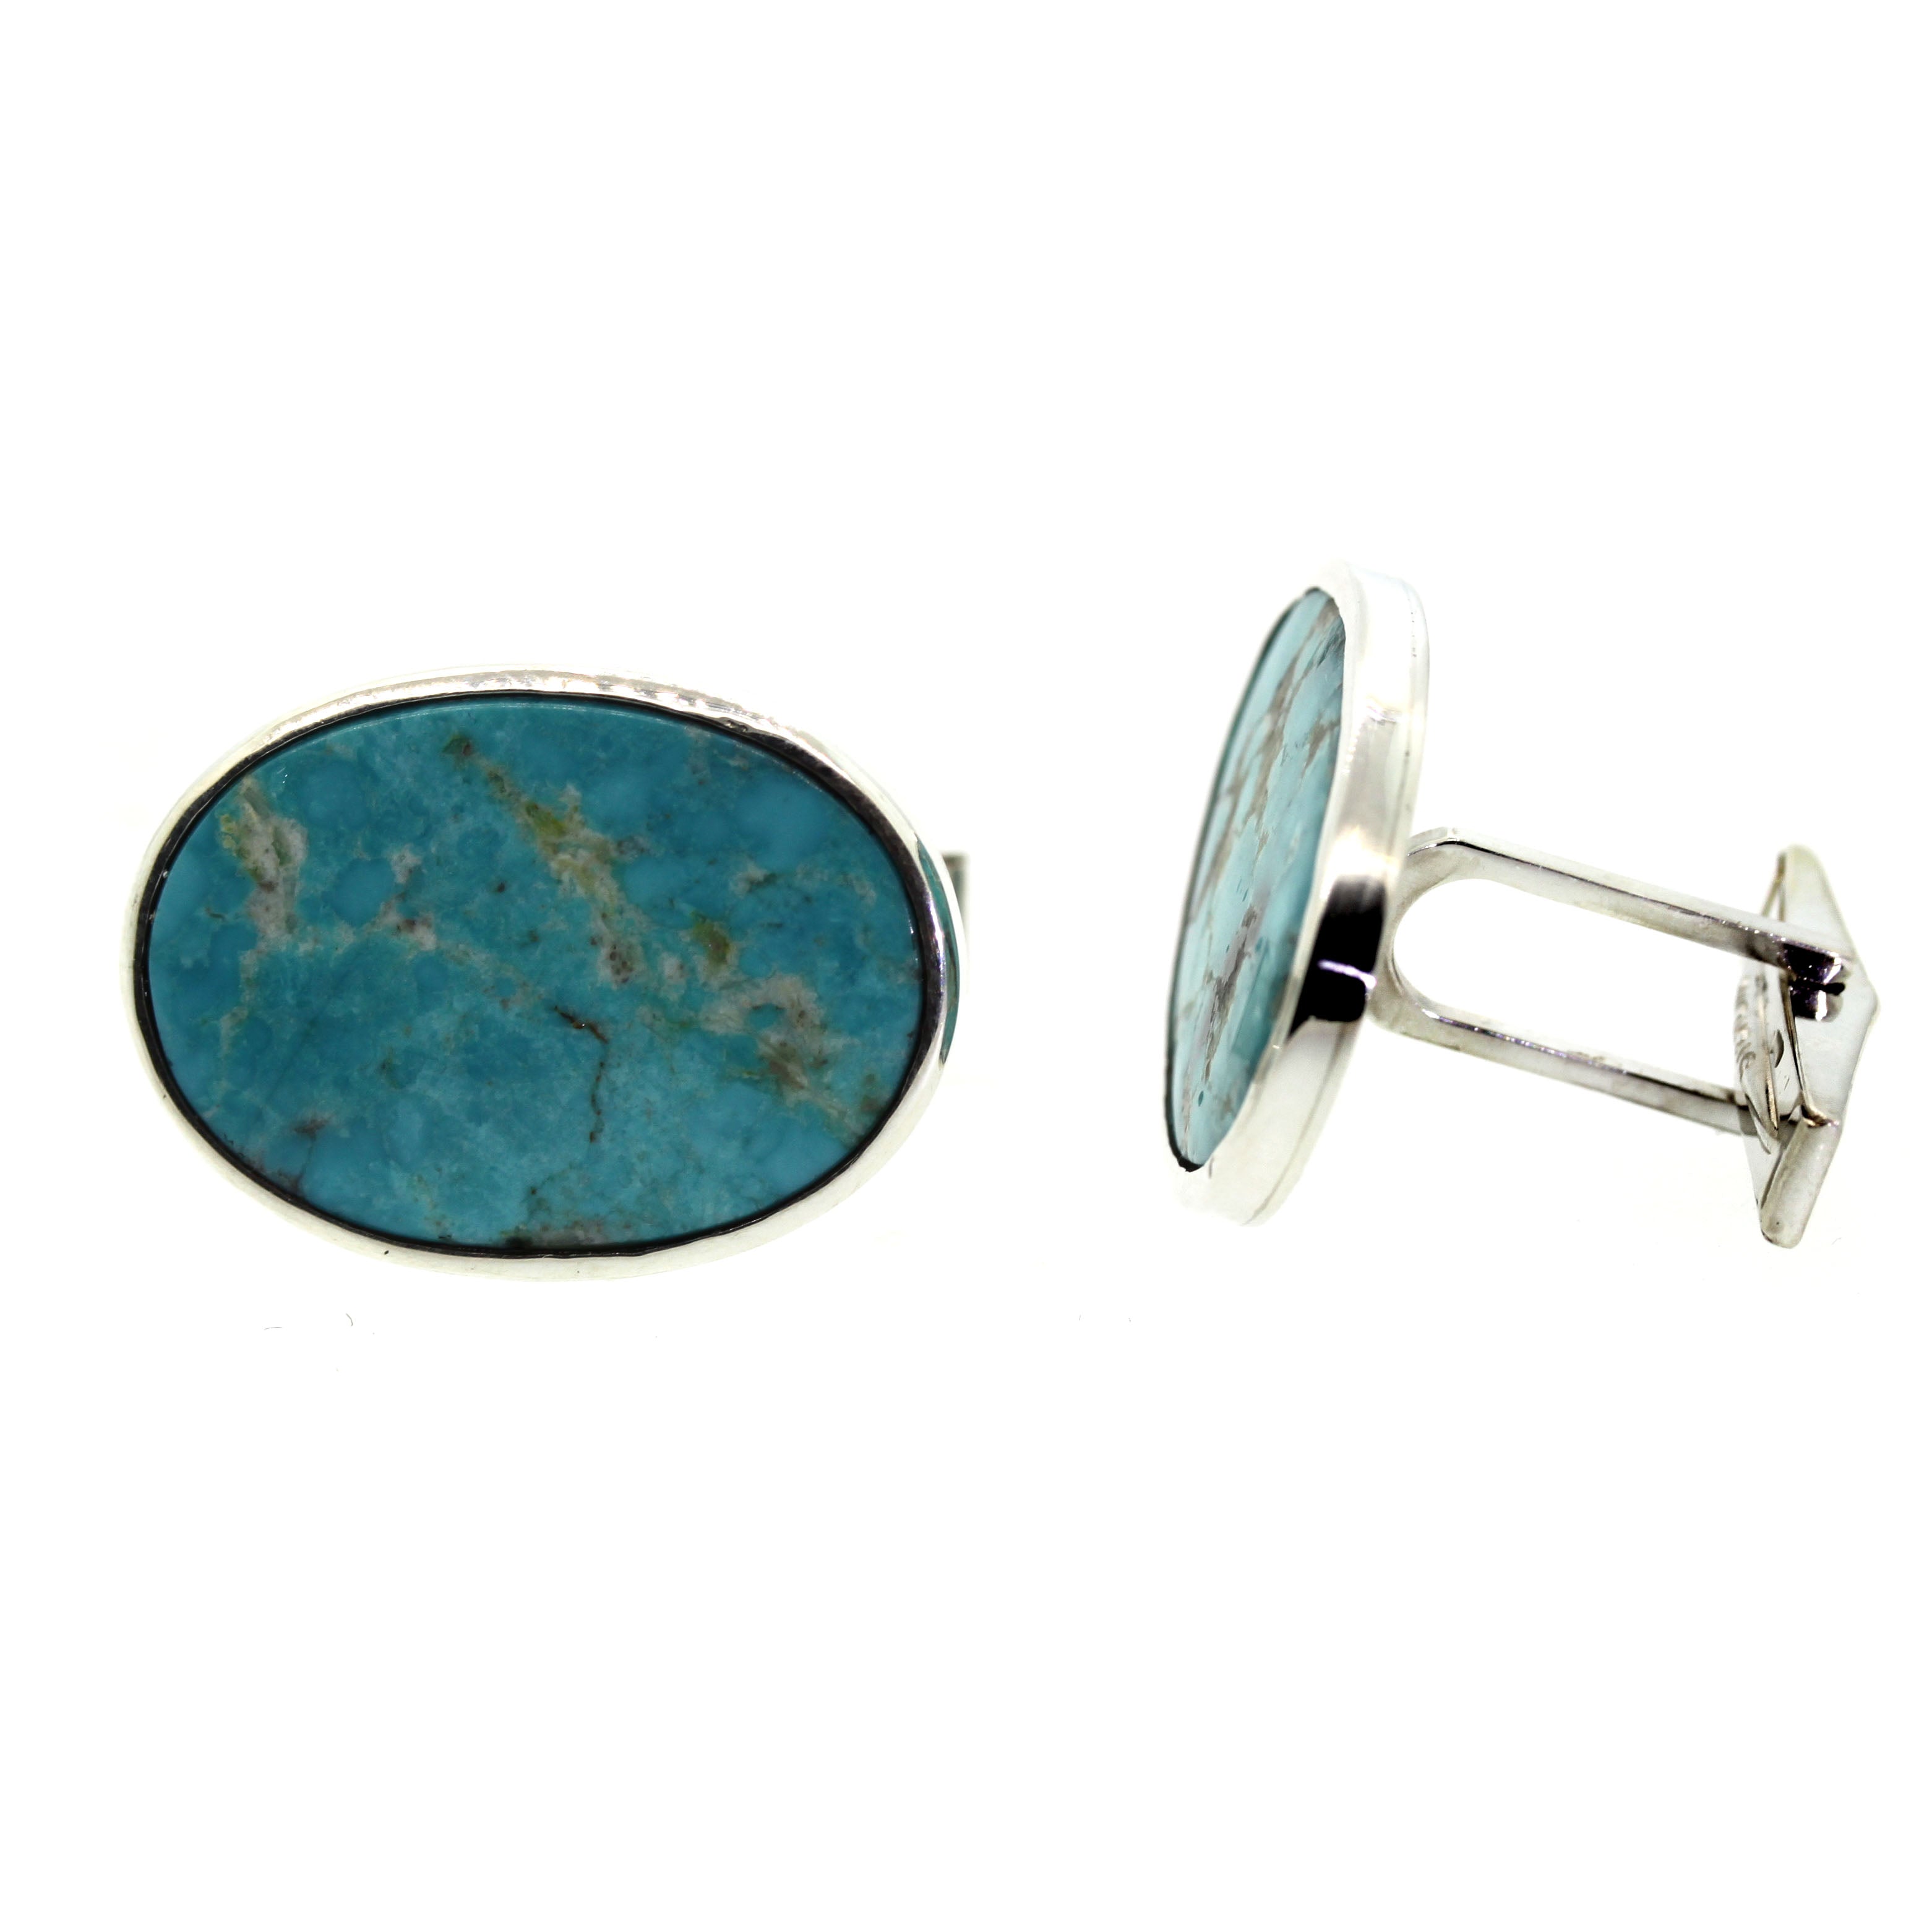 Turquoise Cuff Links - Rebecca Lankford Designs - Houston, TX